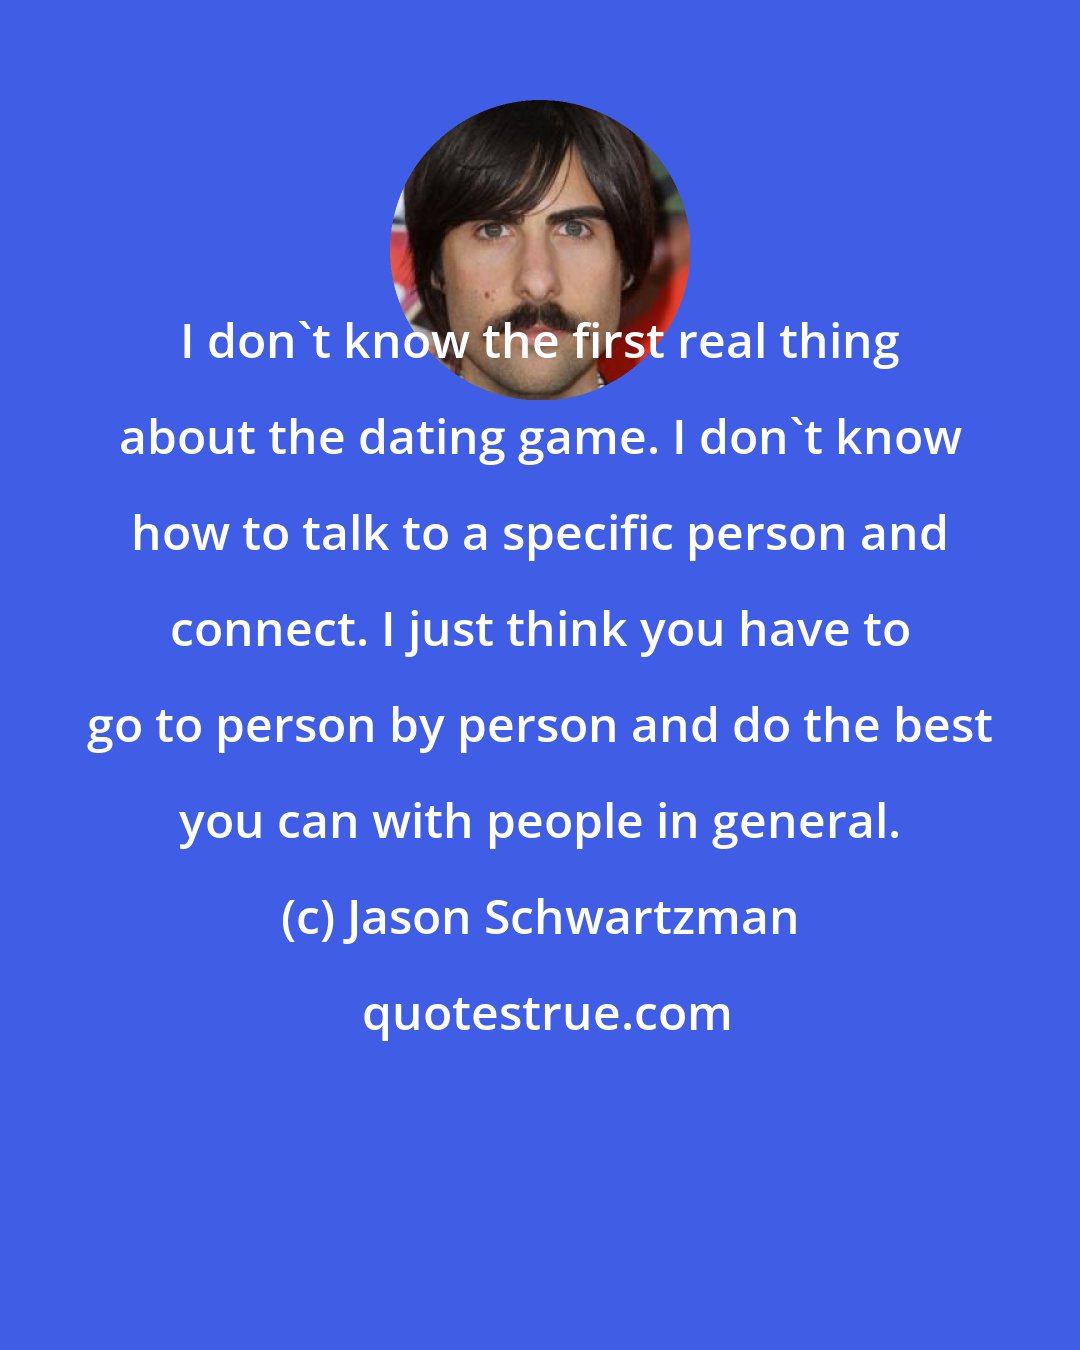 Jason Schwartzman: I don't know the first real thing about the dating game. I don't know how to talk to a specific person and connect. I just think you have to go to person by person and do the best you can with people in general.